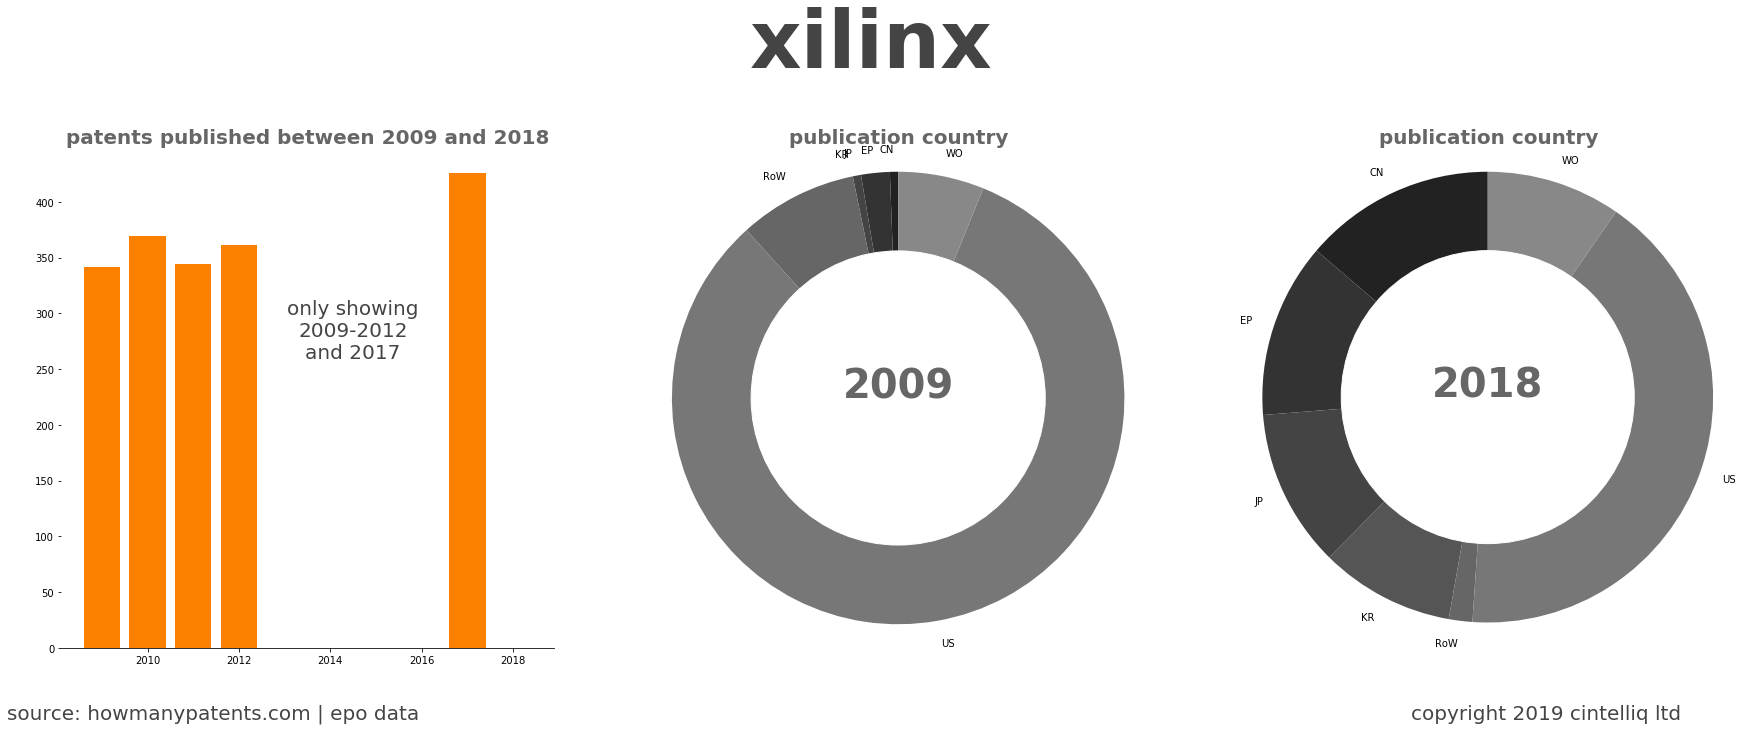 summary of patents for Xilinx